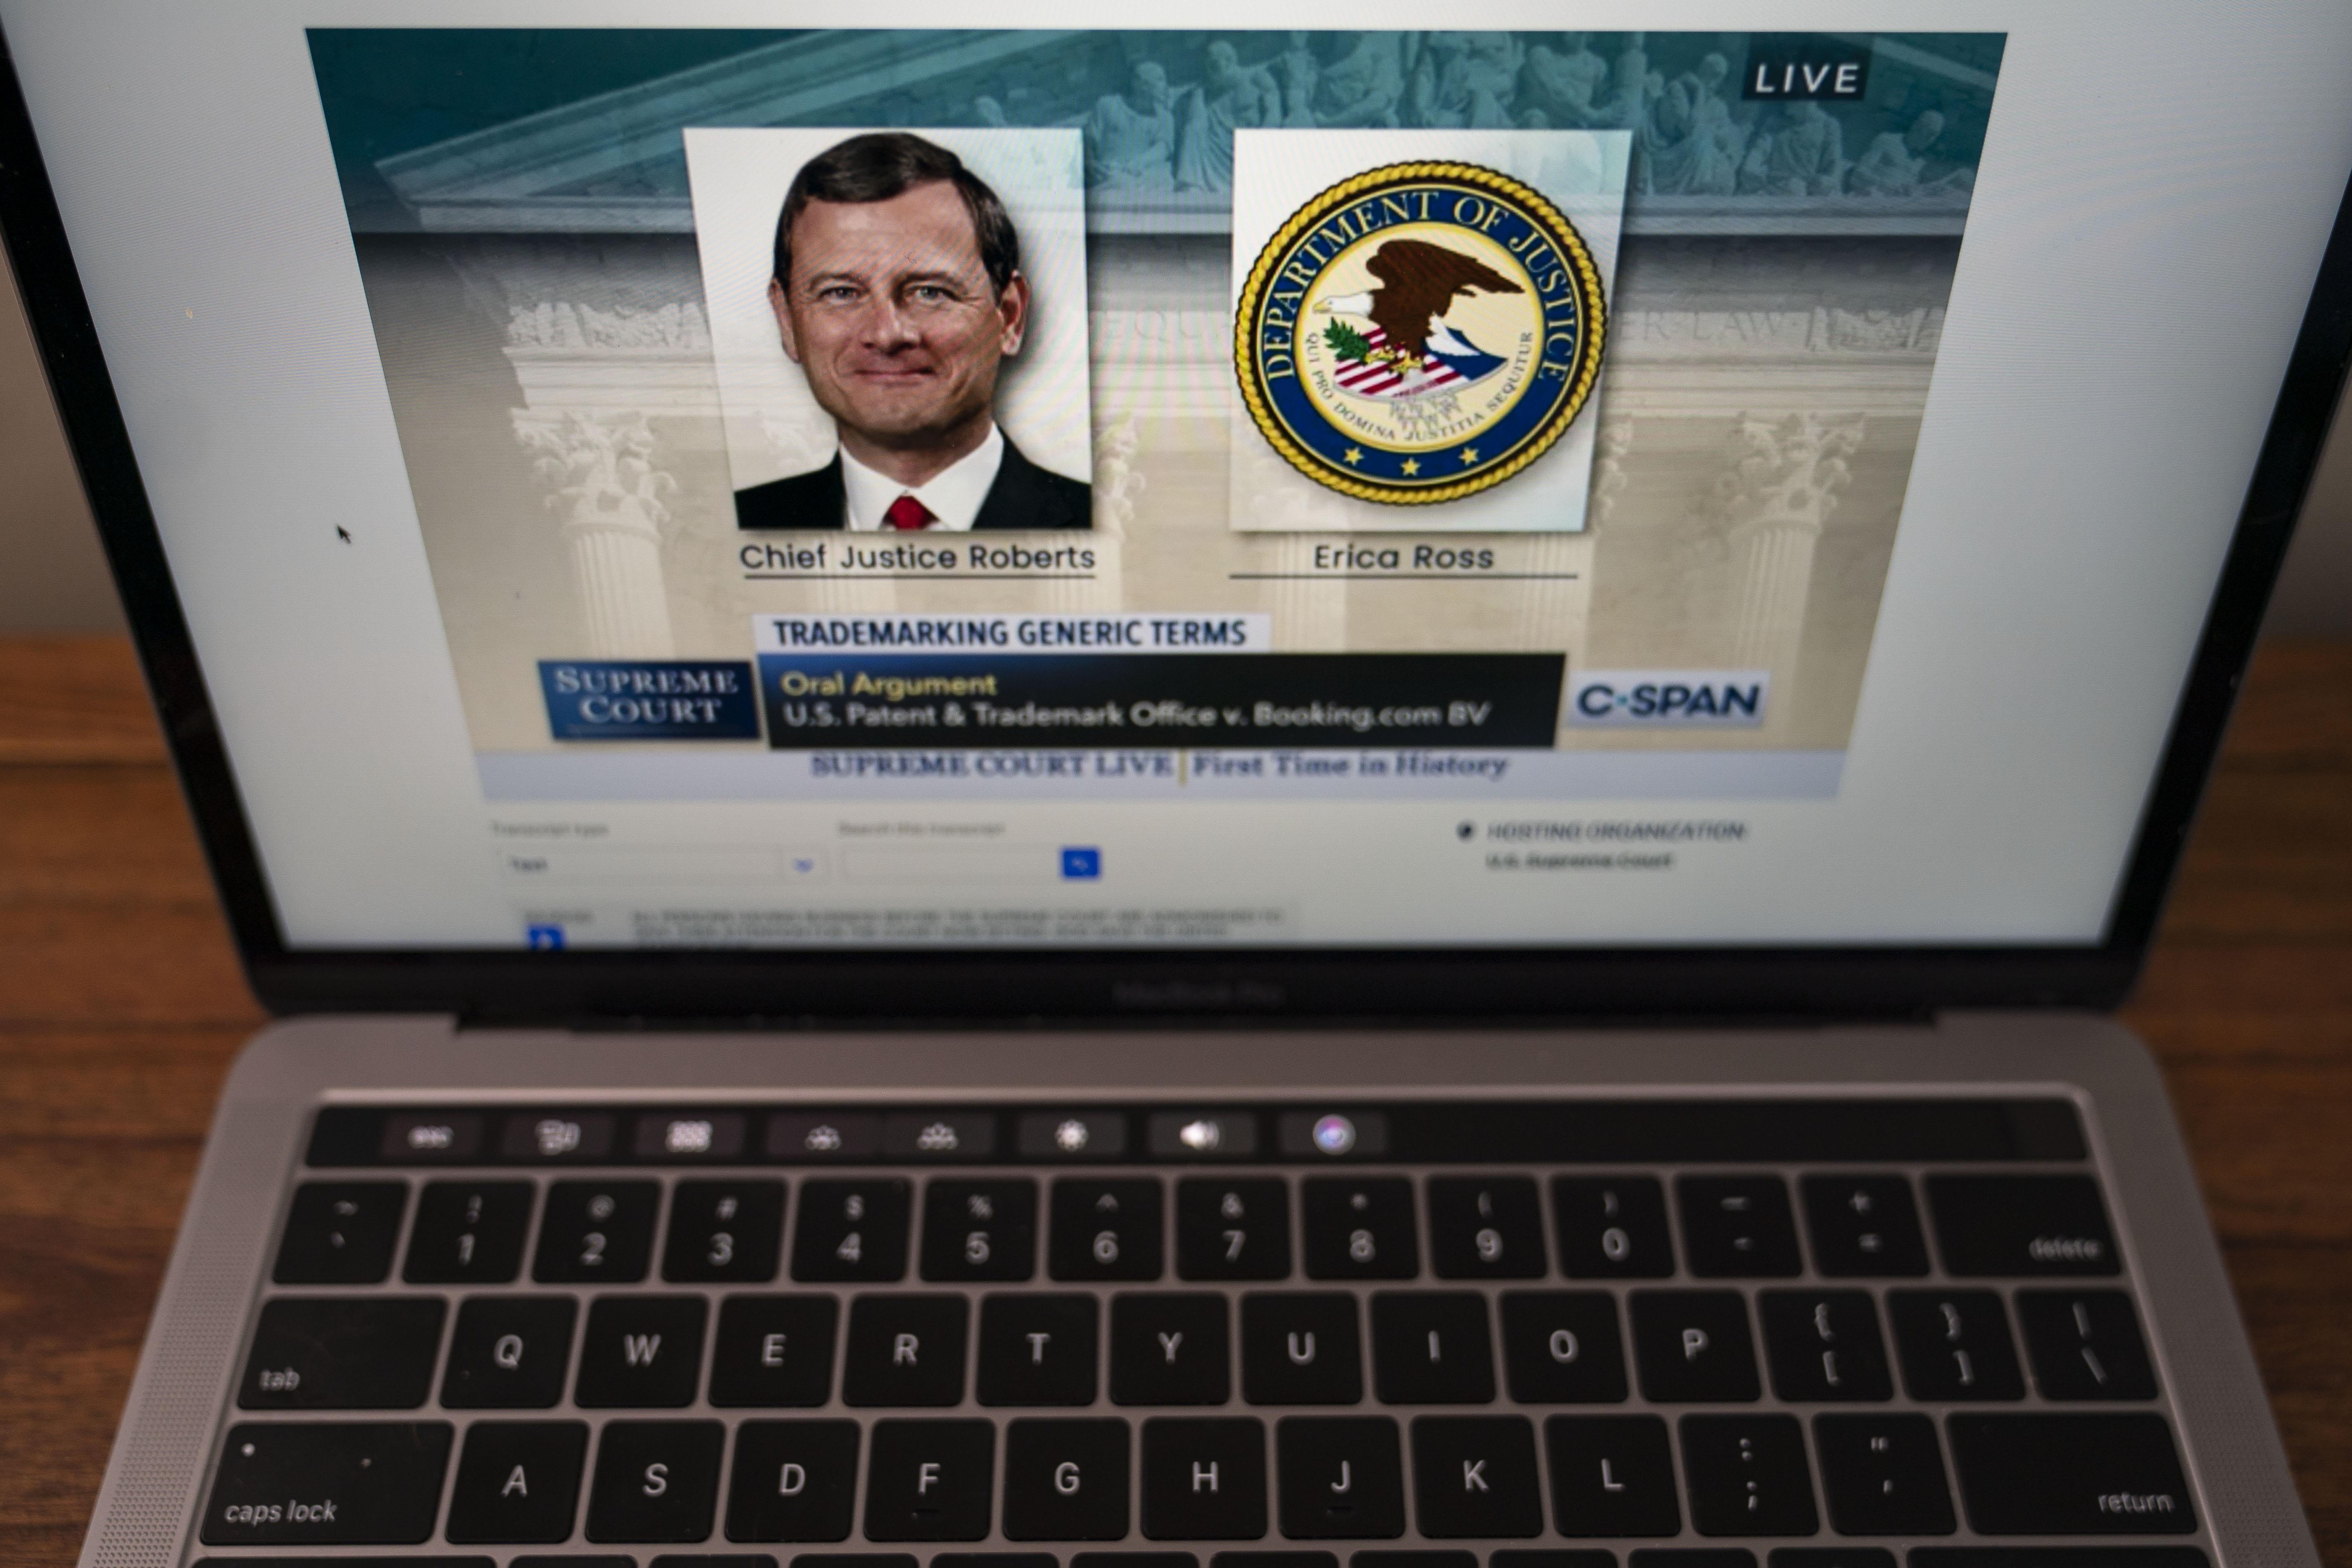 MacBook open to the Supreme Court livestream with John Roberts' photo on the screen as he speaks